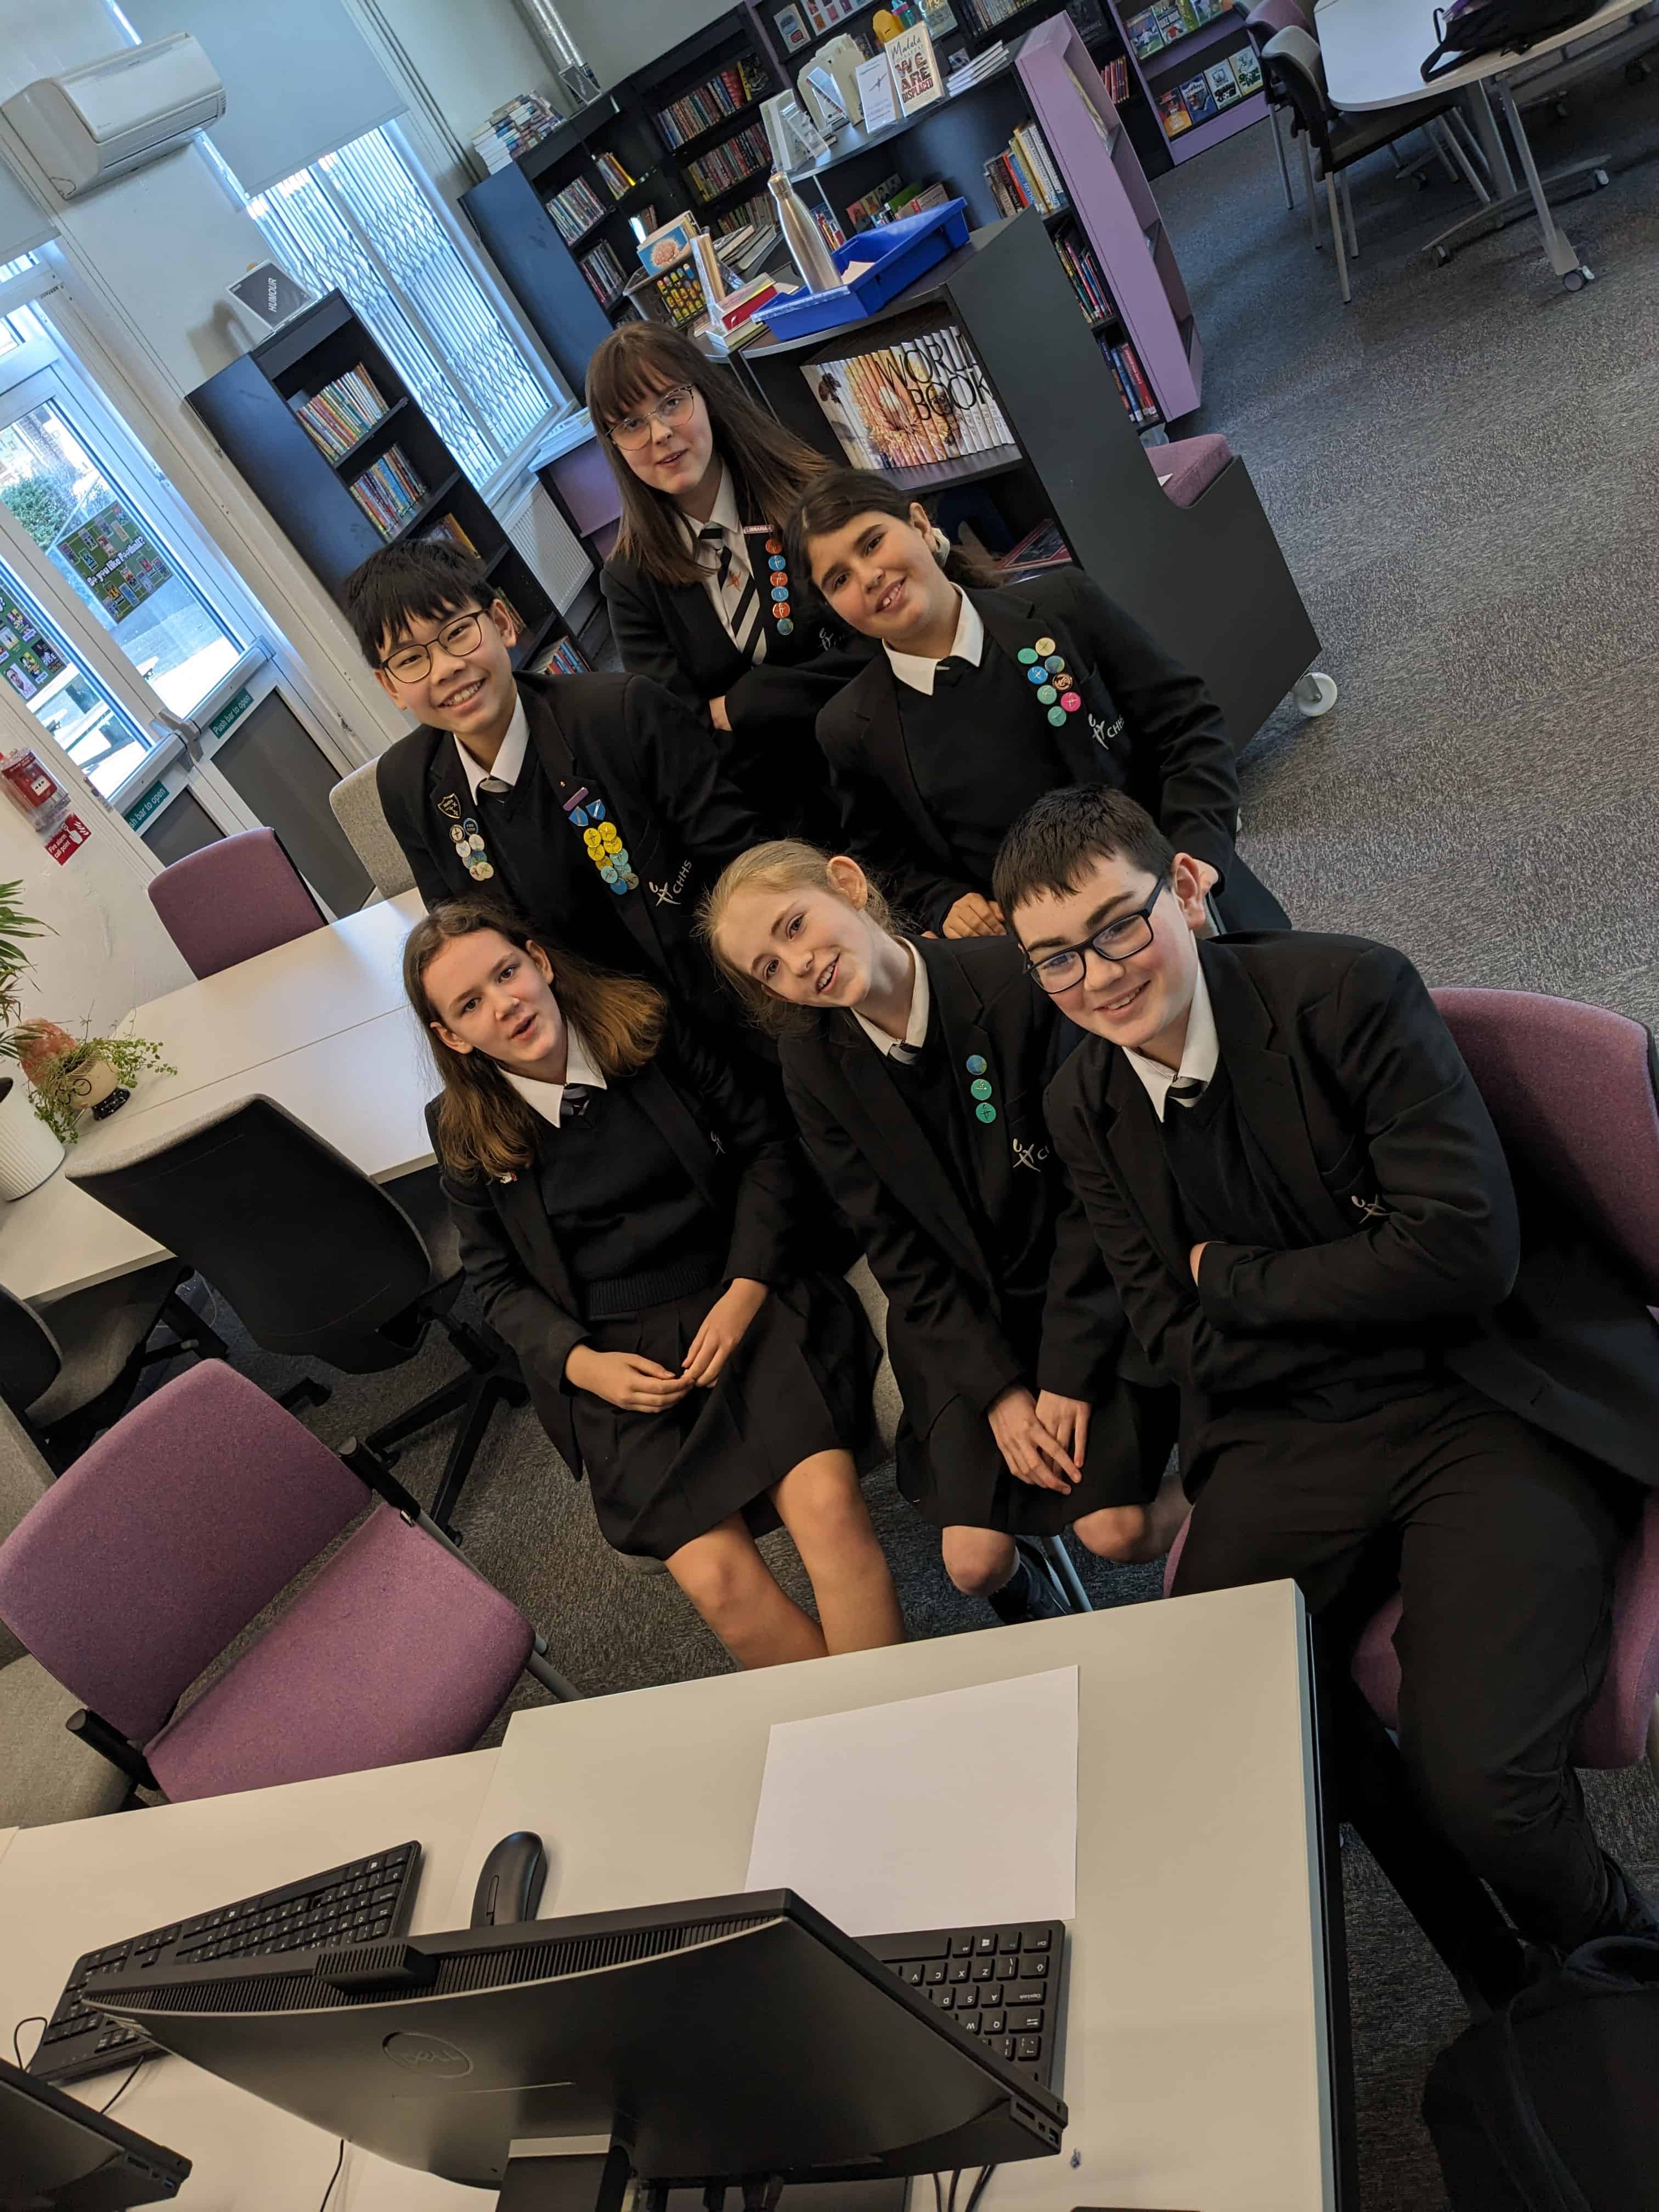 The Cheadle Hulme High School team and scribes for the National Reading Champions Quiz 2024 sit together in the school library.